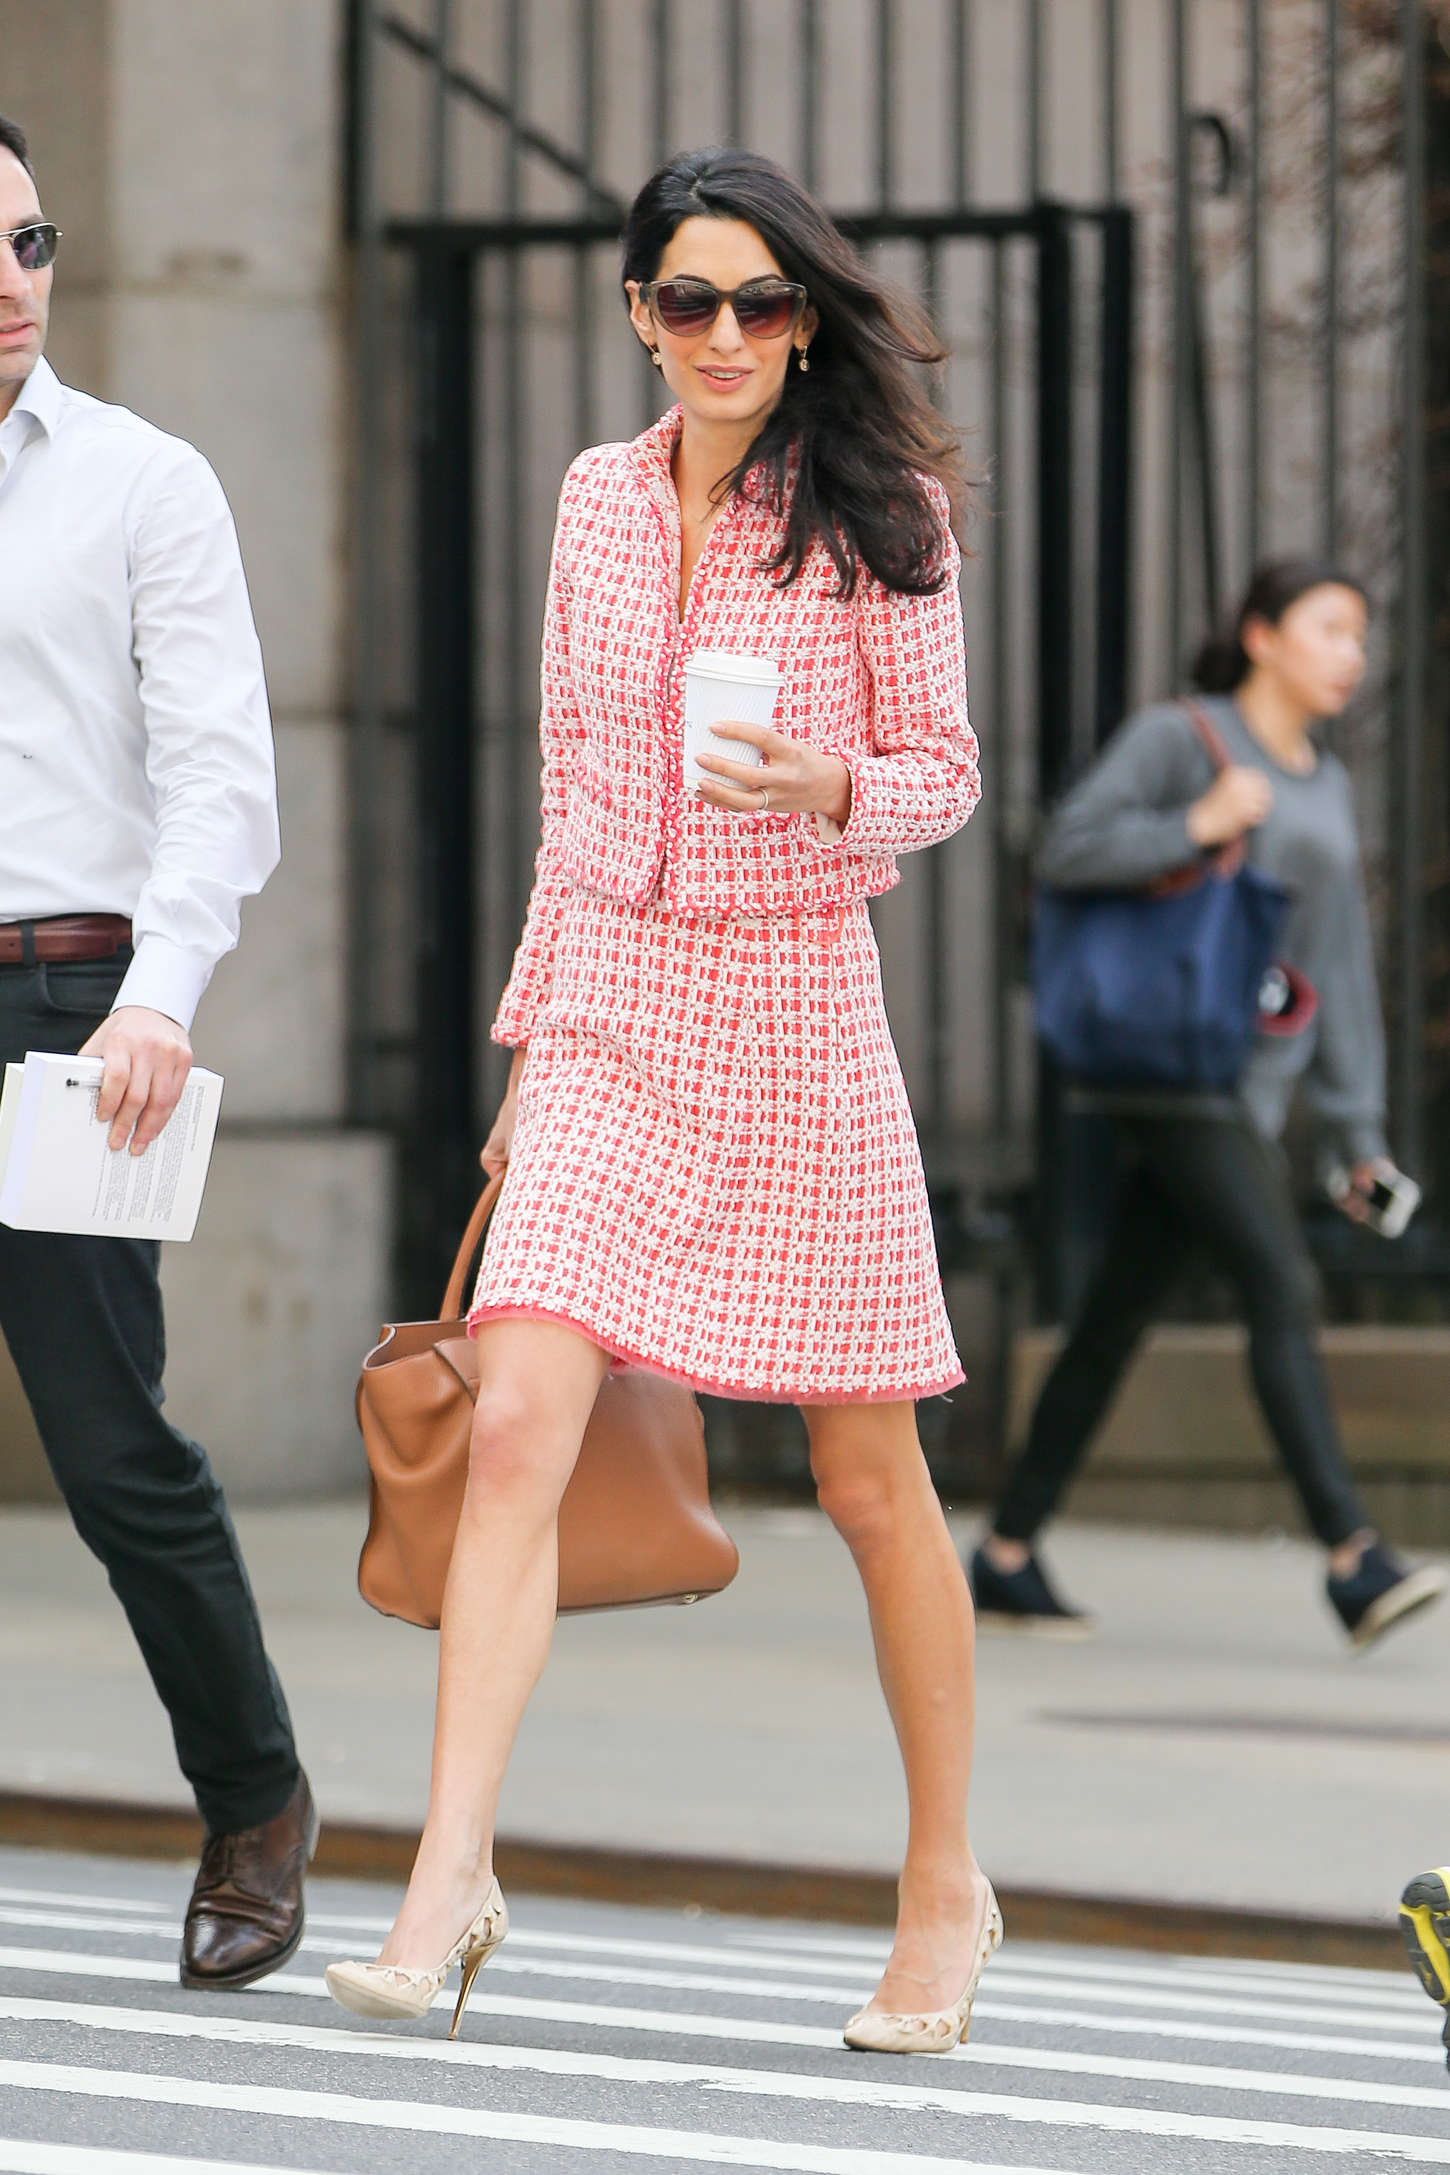 Amal Clooney 2015 : Amal Clooney: Out in NYC -14. 